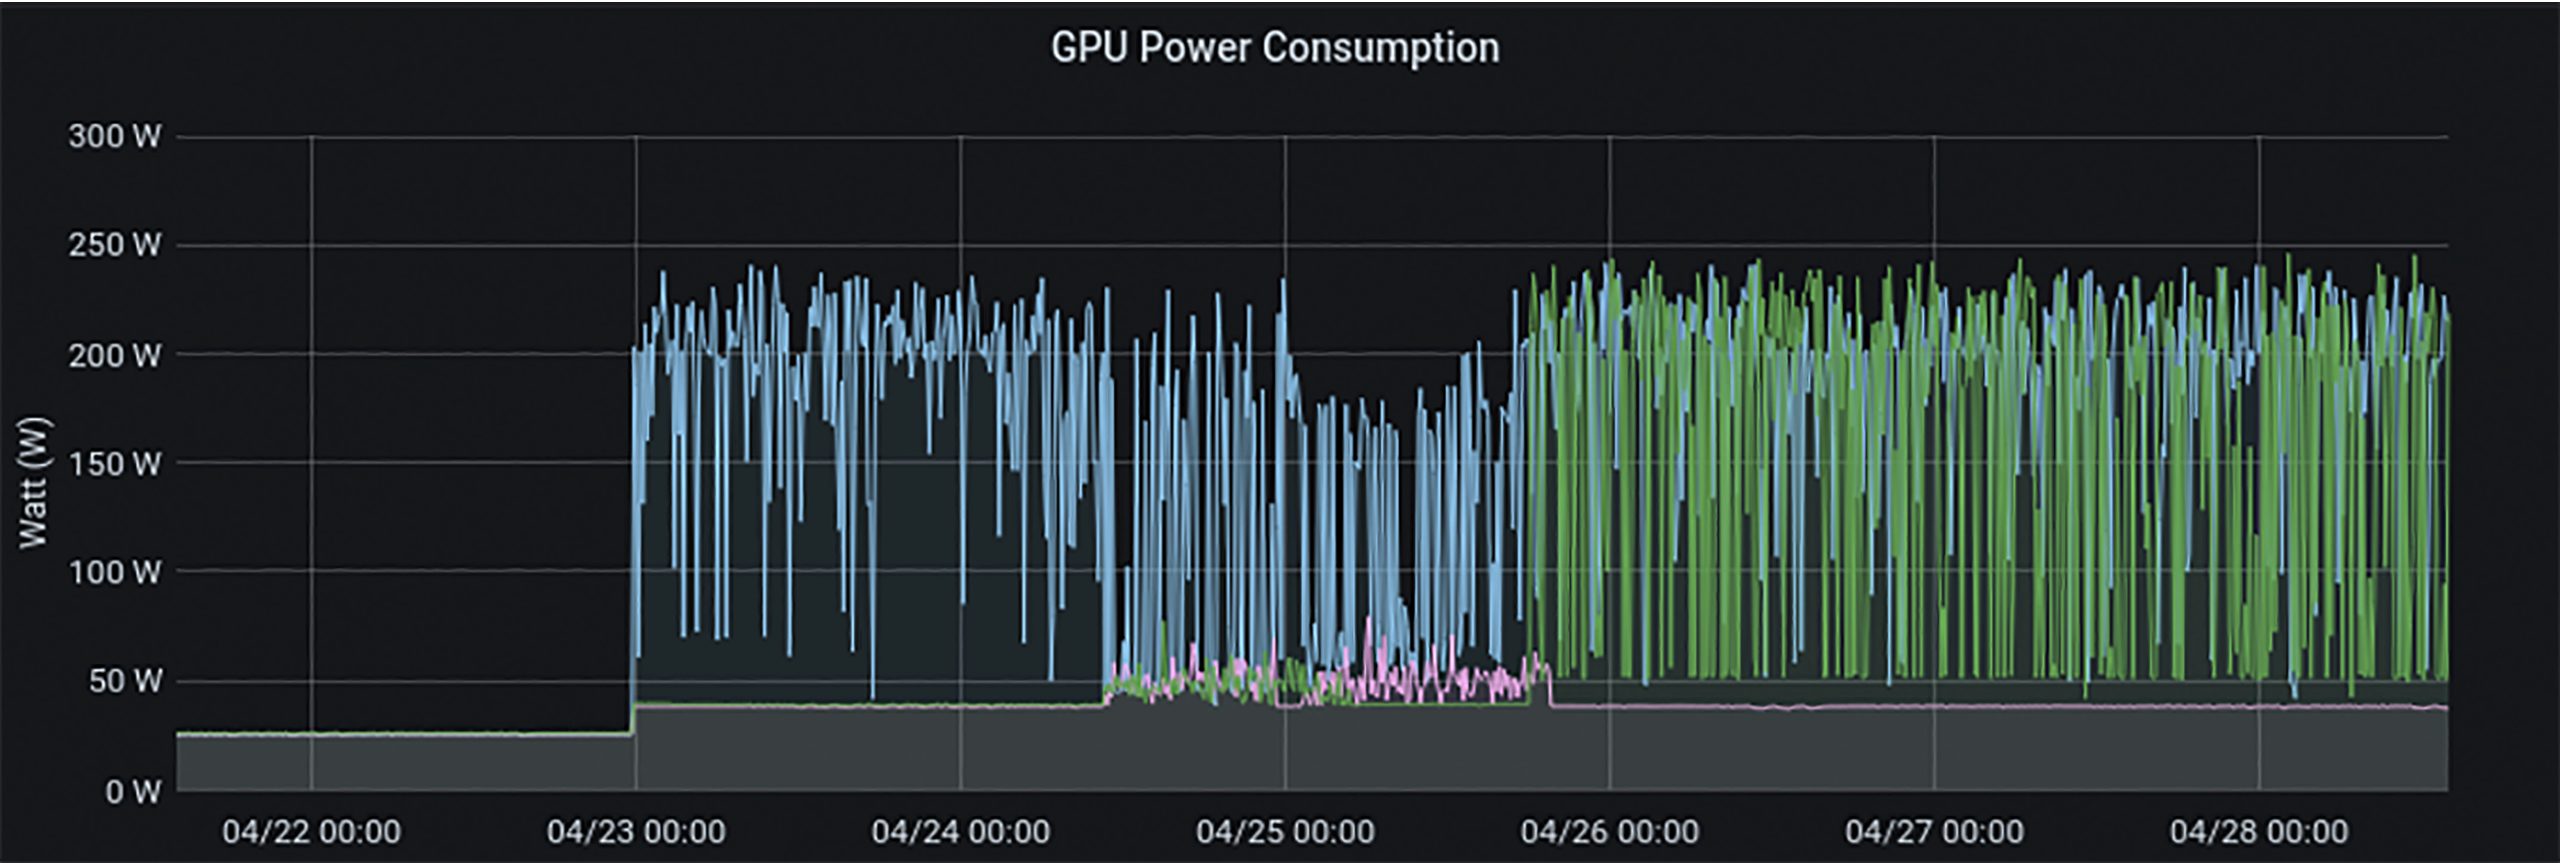 An image named gpupowerconsumption.png